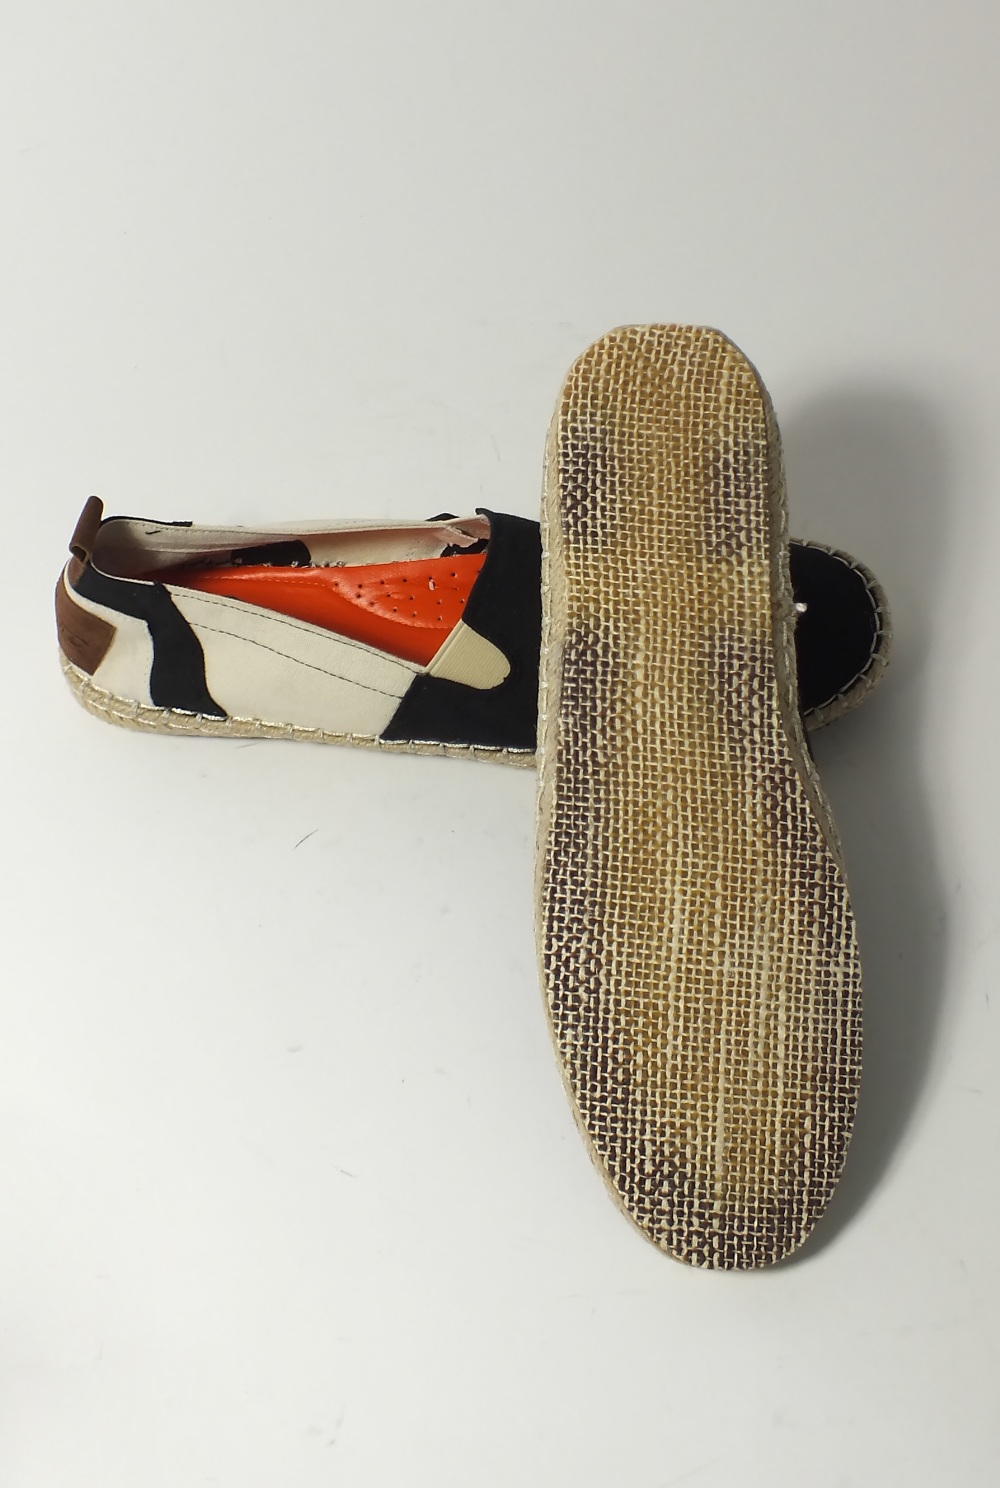 A pair of Bellfield espadrilles, black, cream and brown canvas, UK 9 - Image 7 of 7